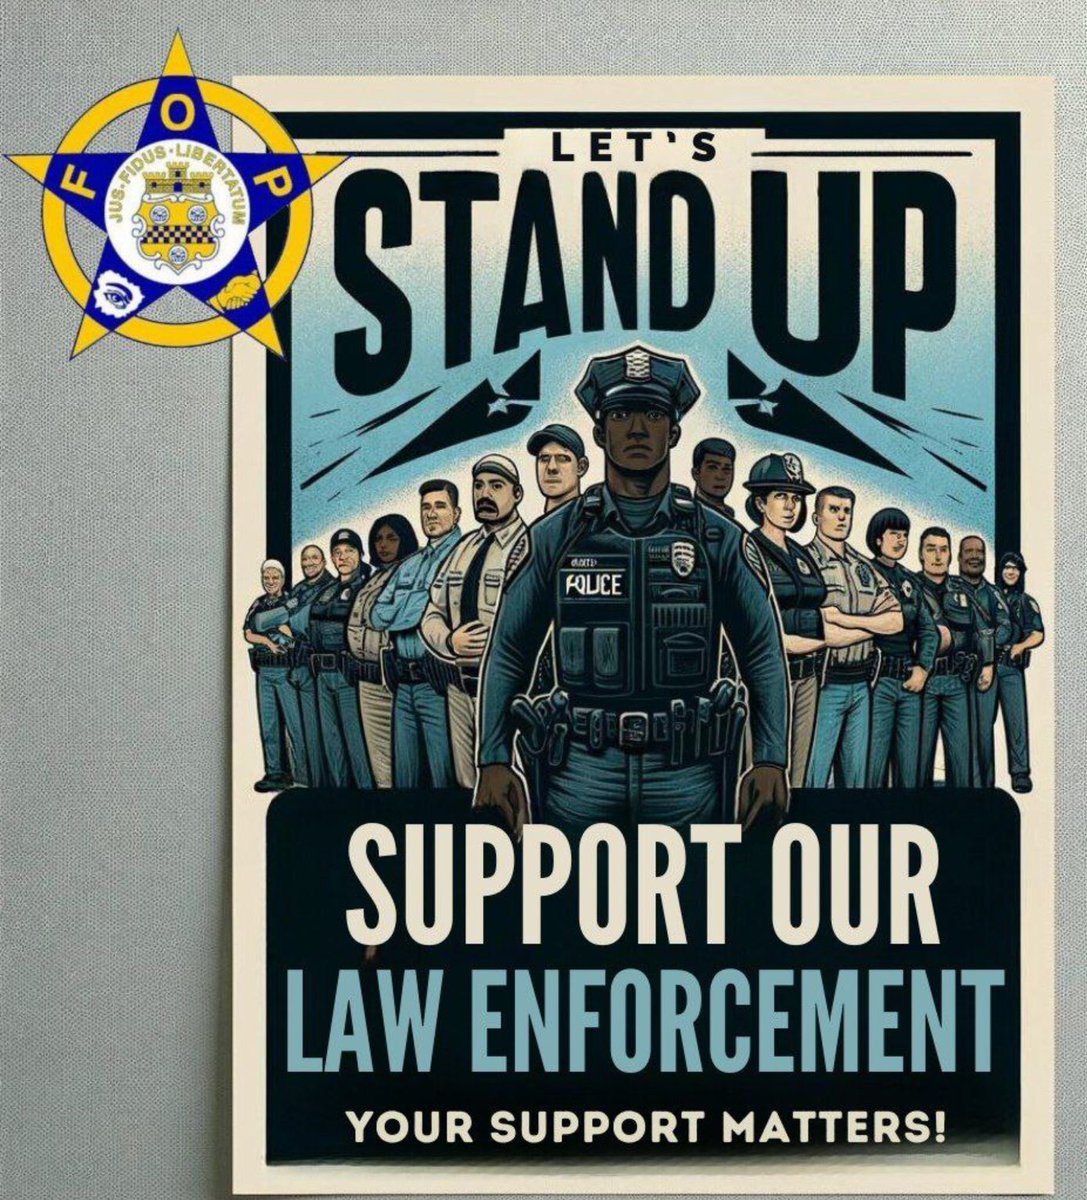 I support law enforcement. Do you? If so repost this.